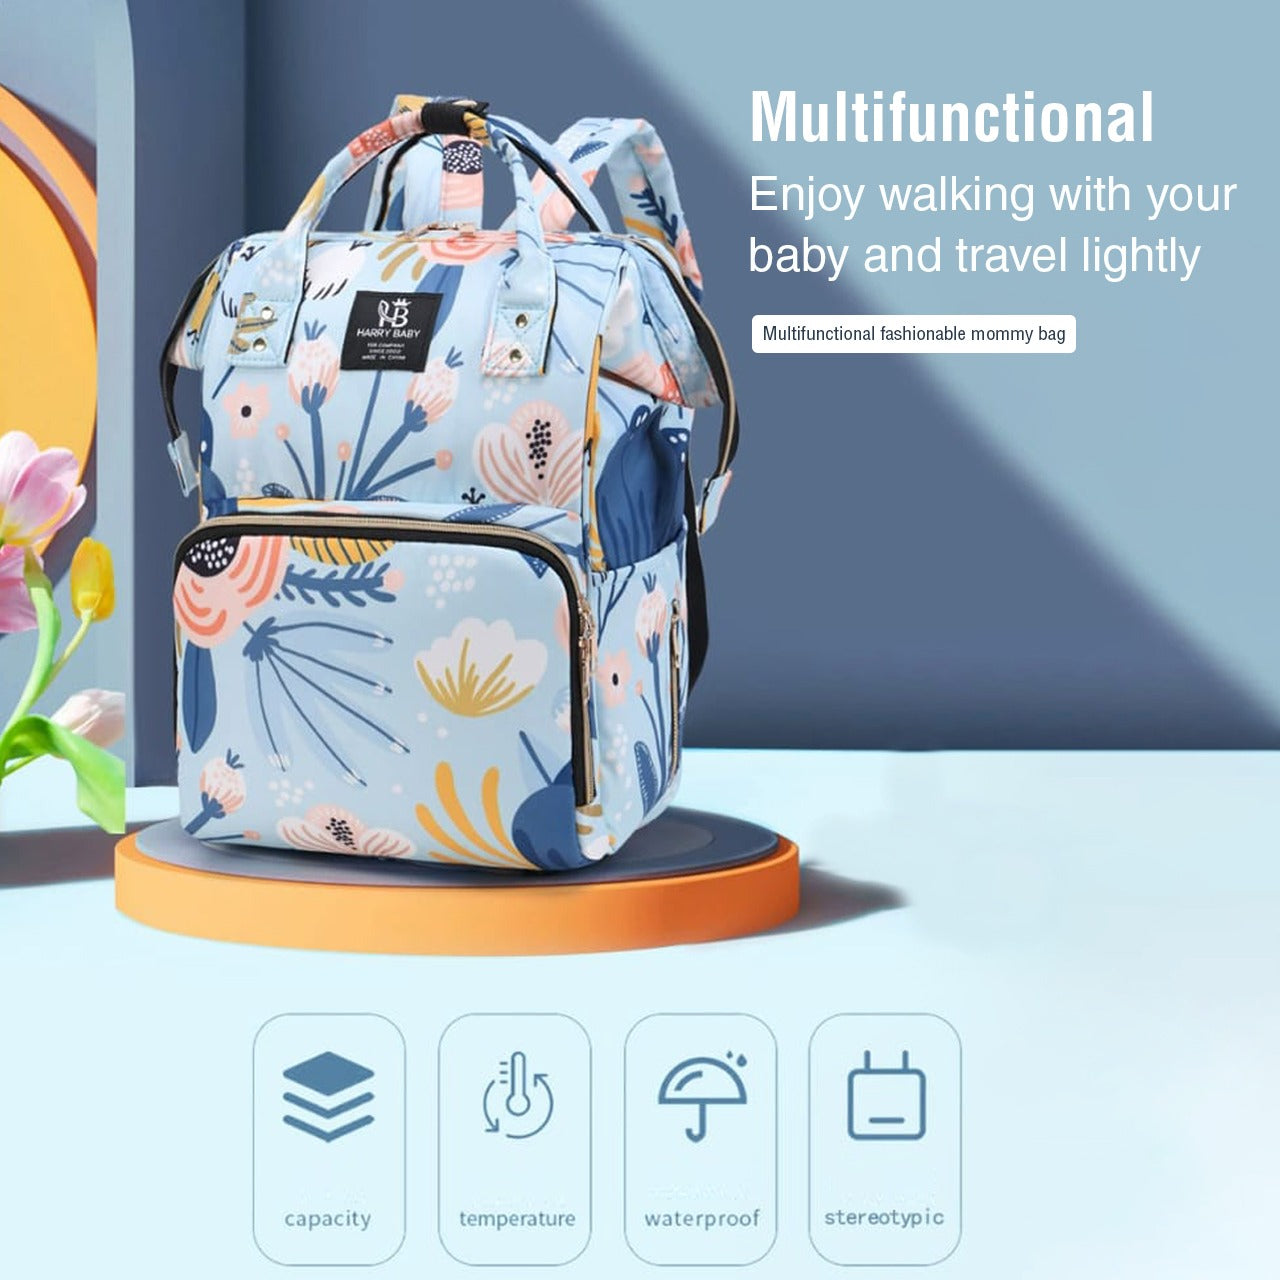 Showcasing Mother Backpack Bag with its key features 